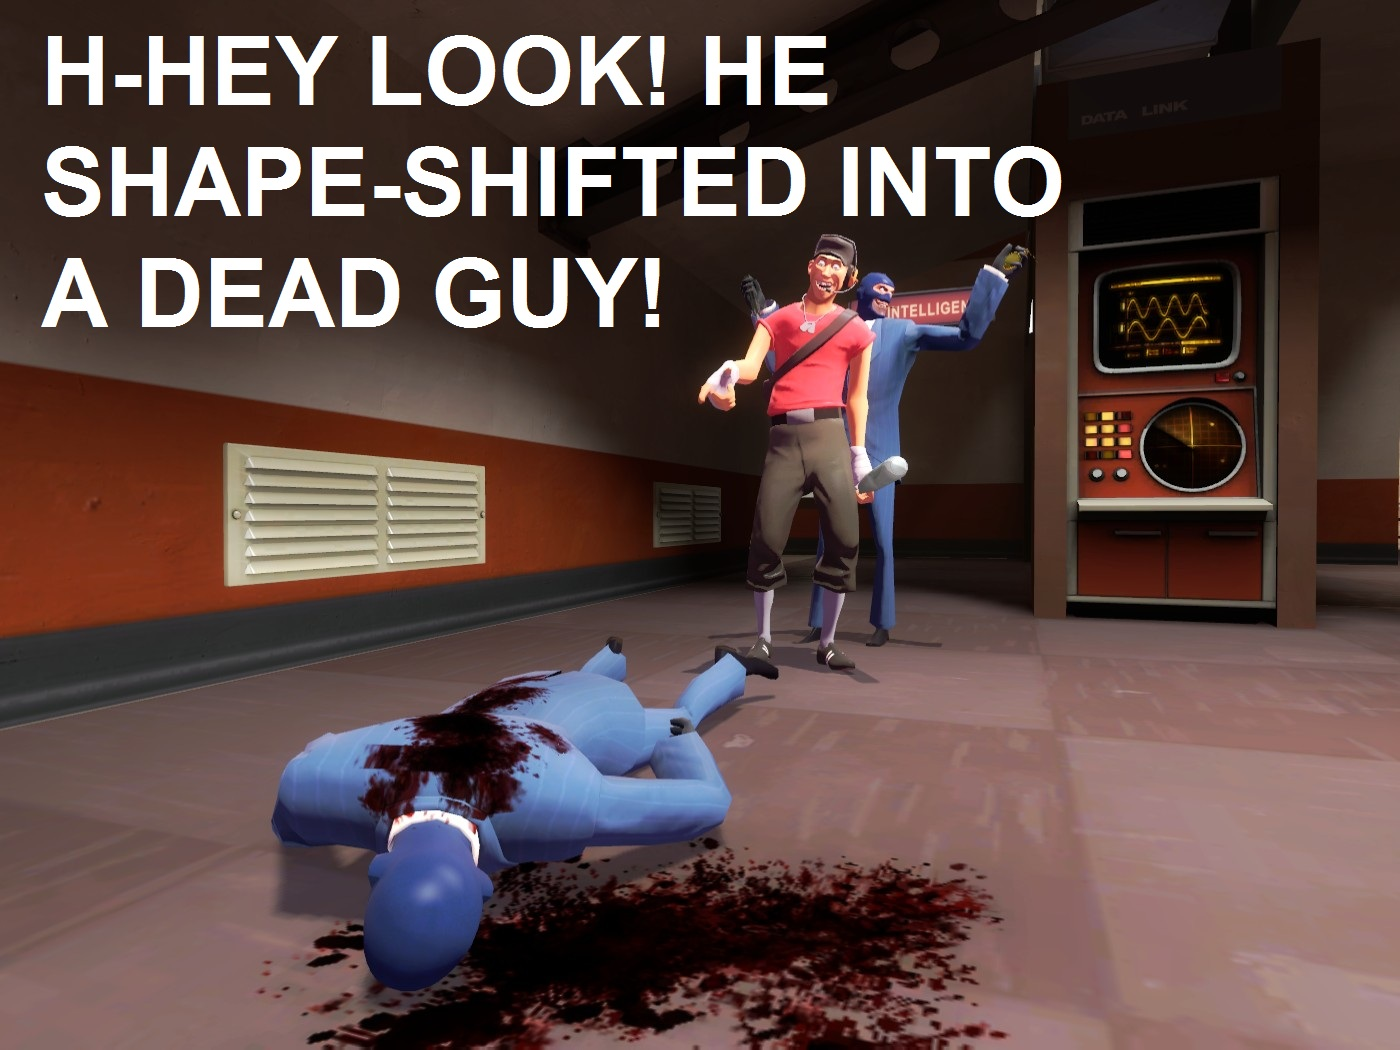 Tf2 Shapeshifted into a dead guy Blank Meme Template